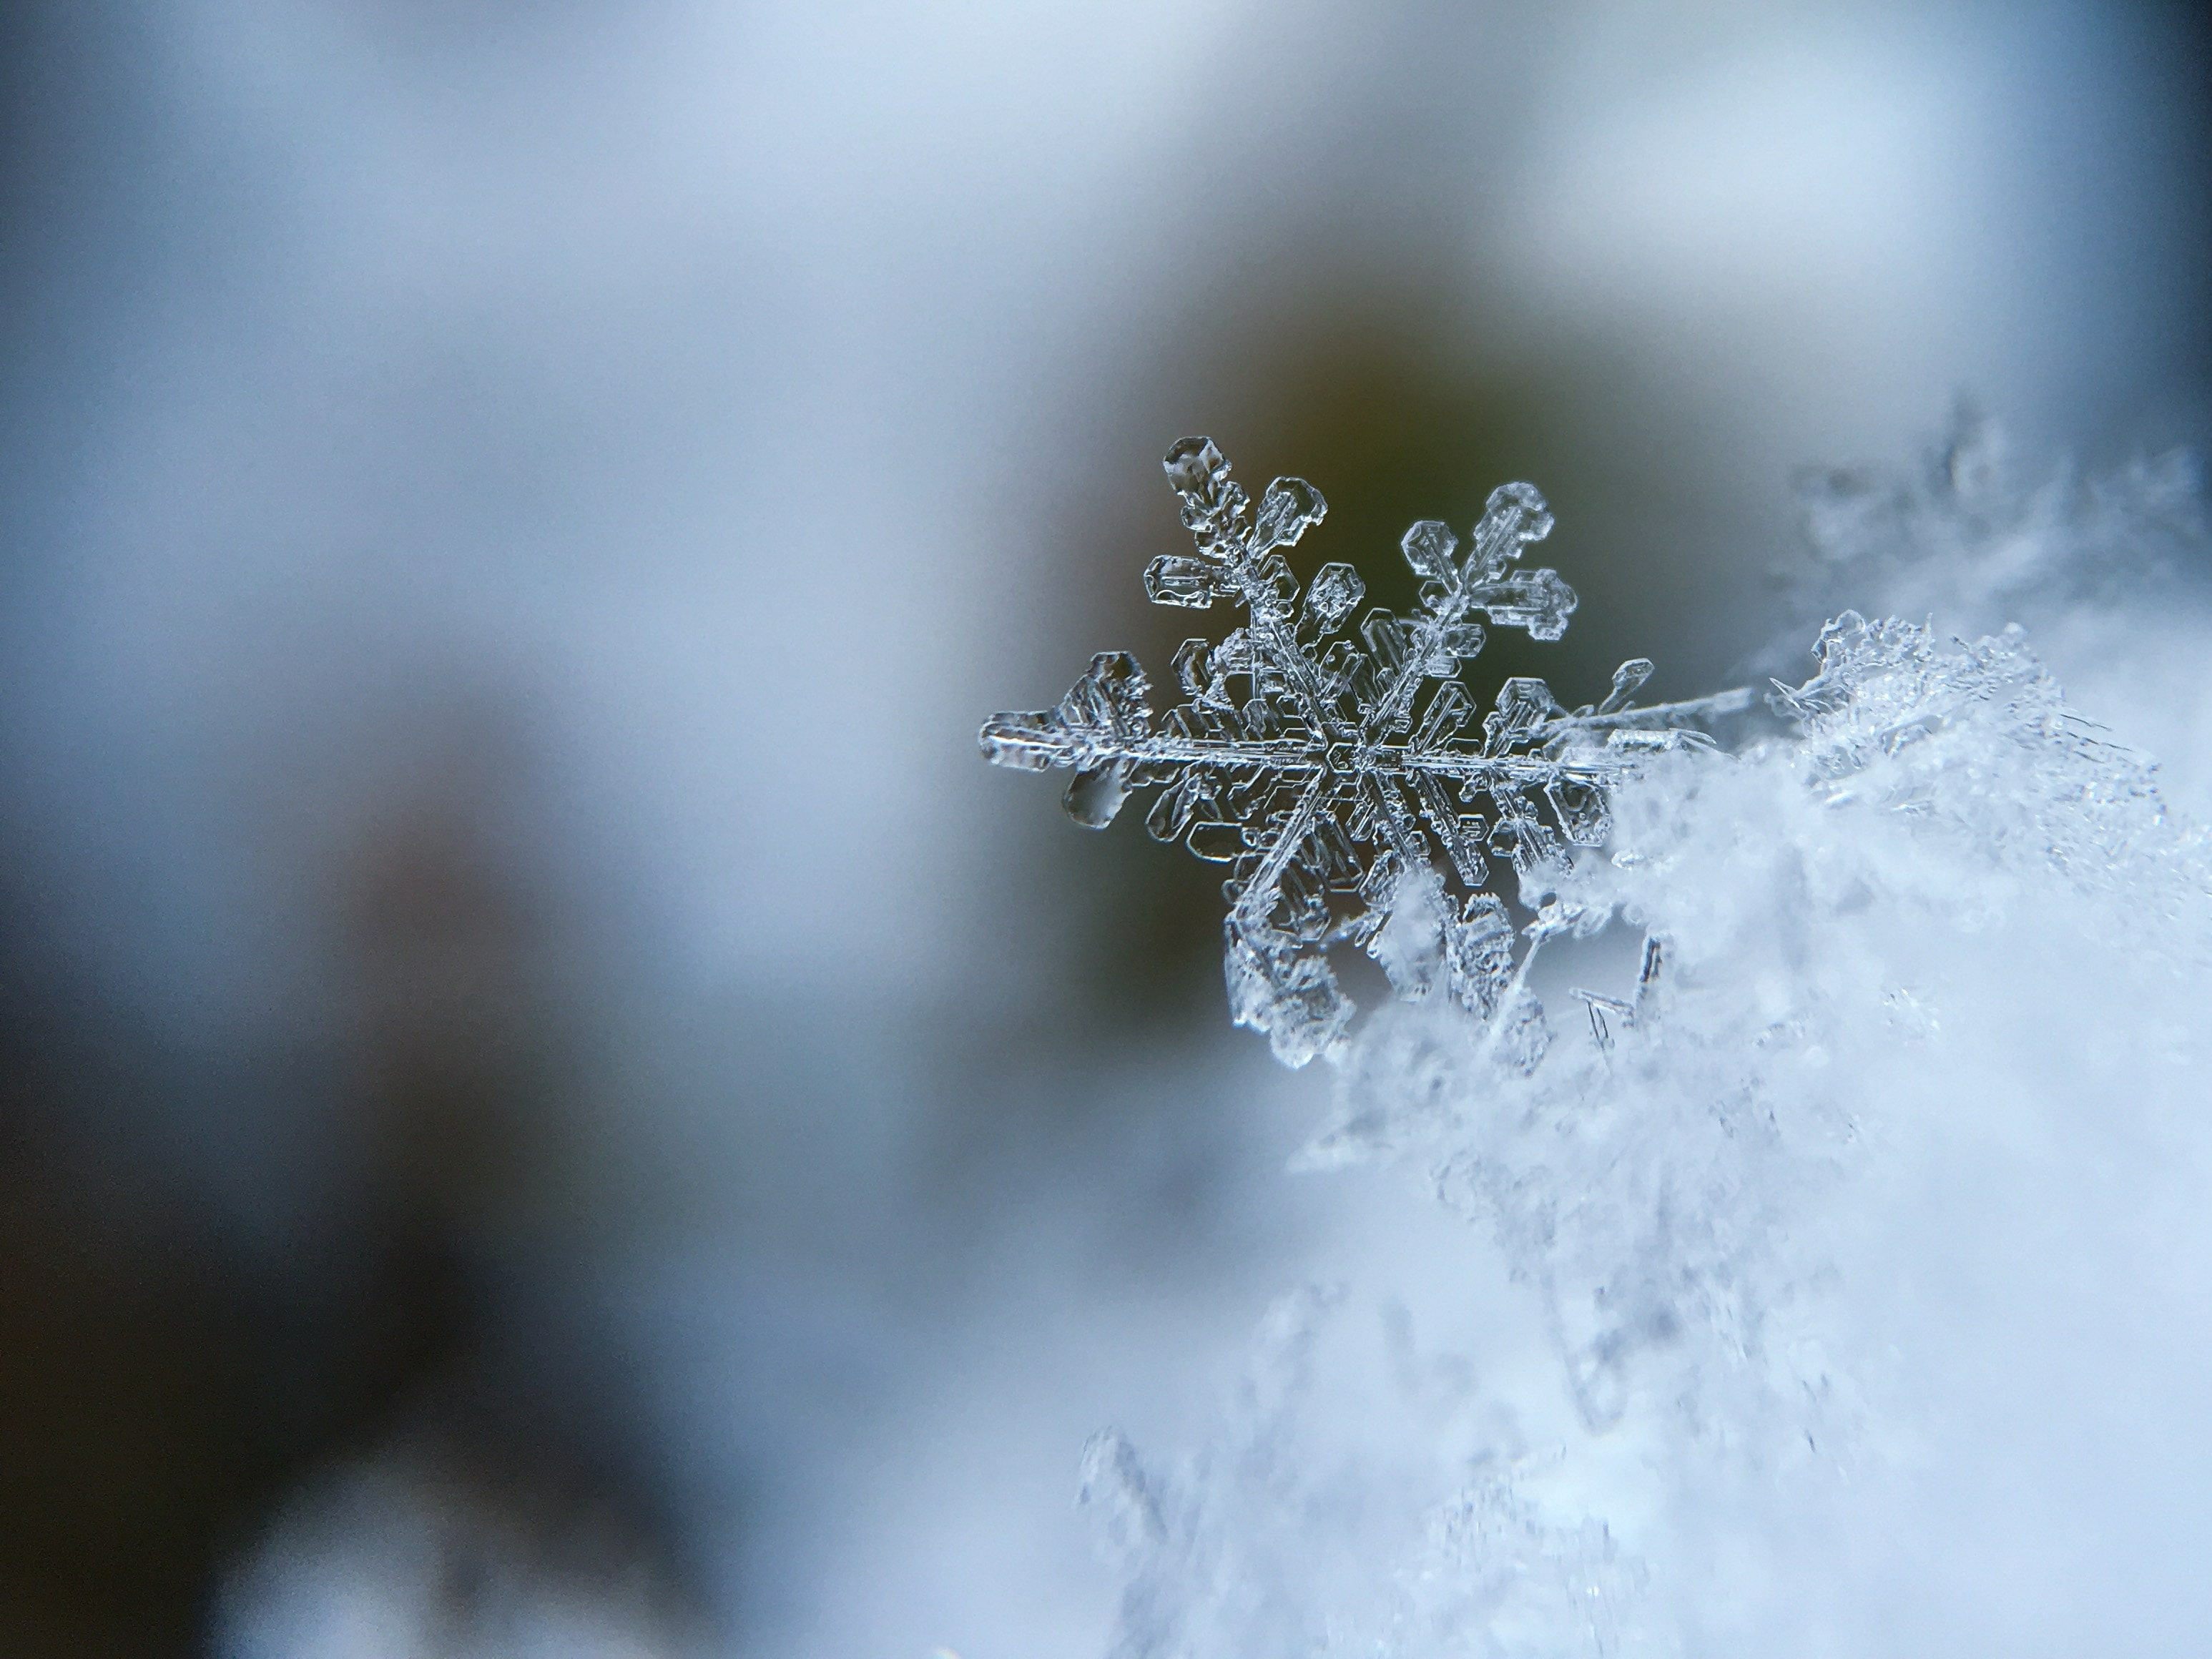 A closeup shot of a snowflake that shows the intricate detail and magnificent beauty.